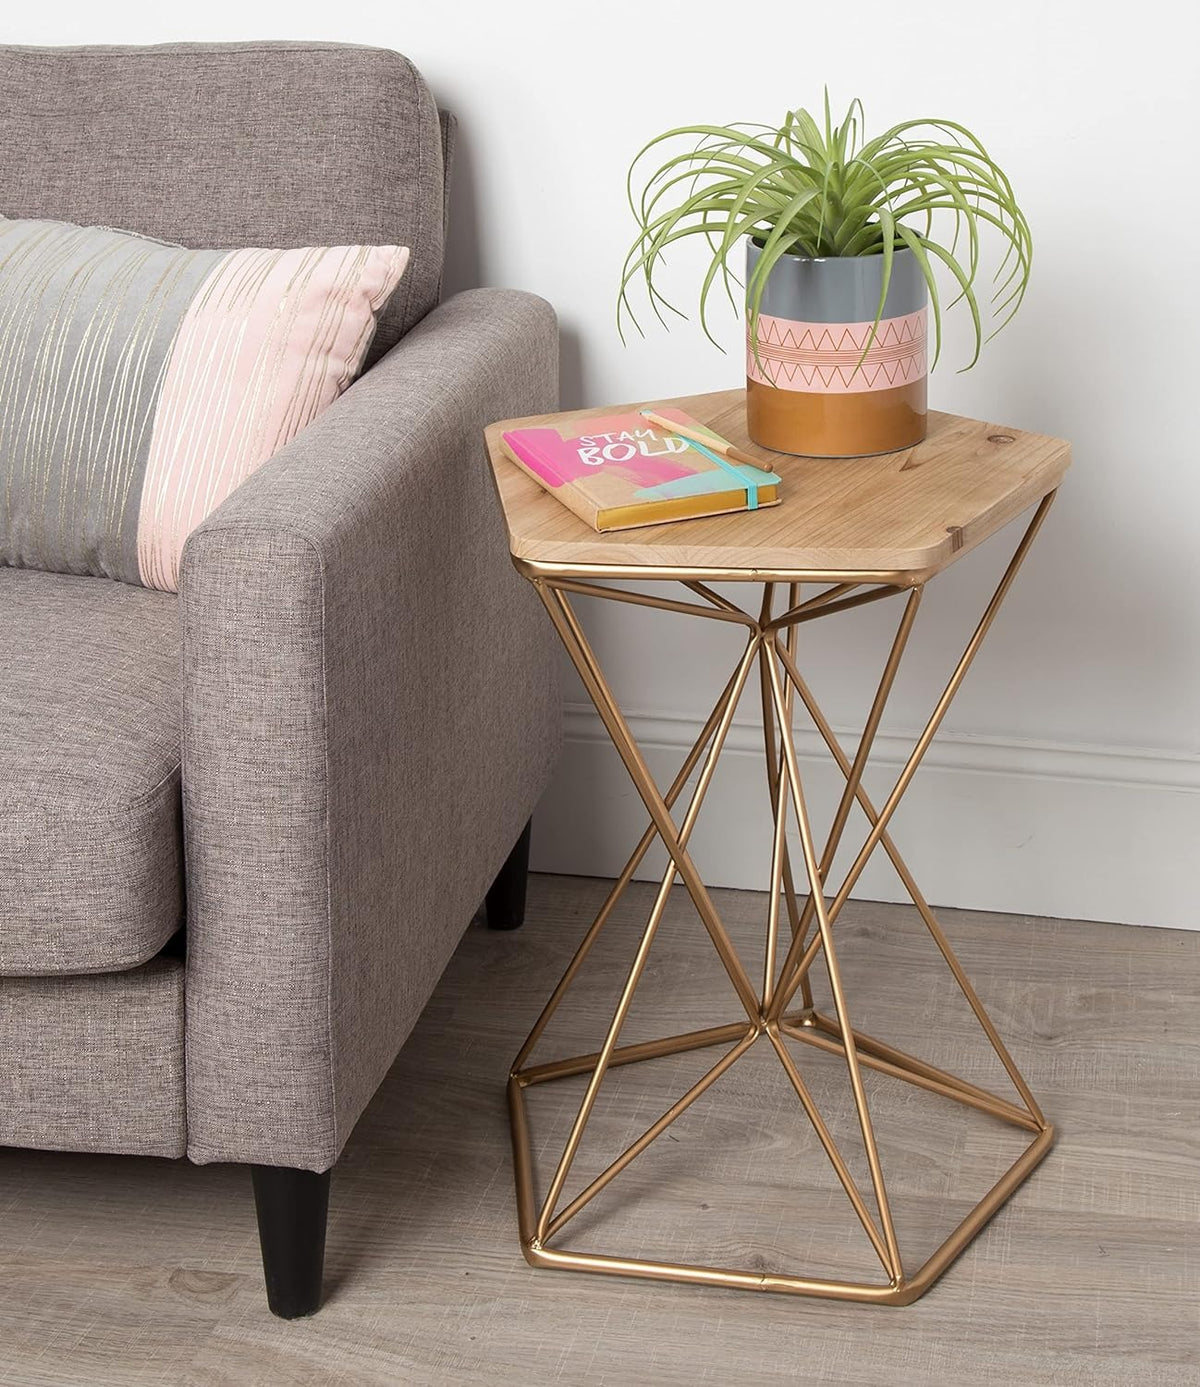 Hexagonal Side Table With Geometric Golden Base